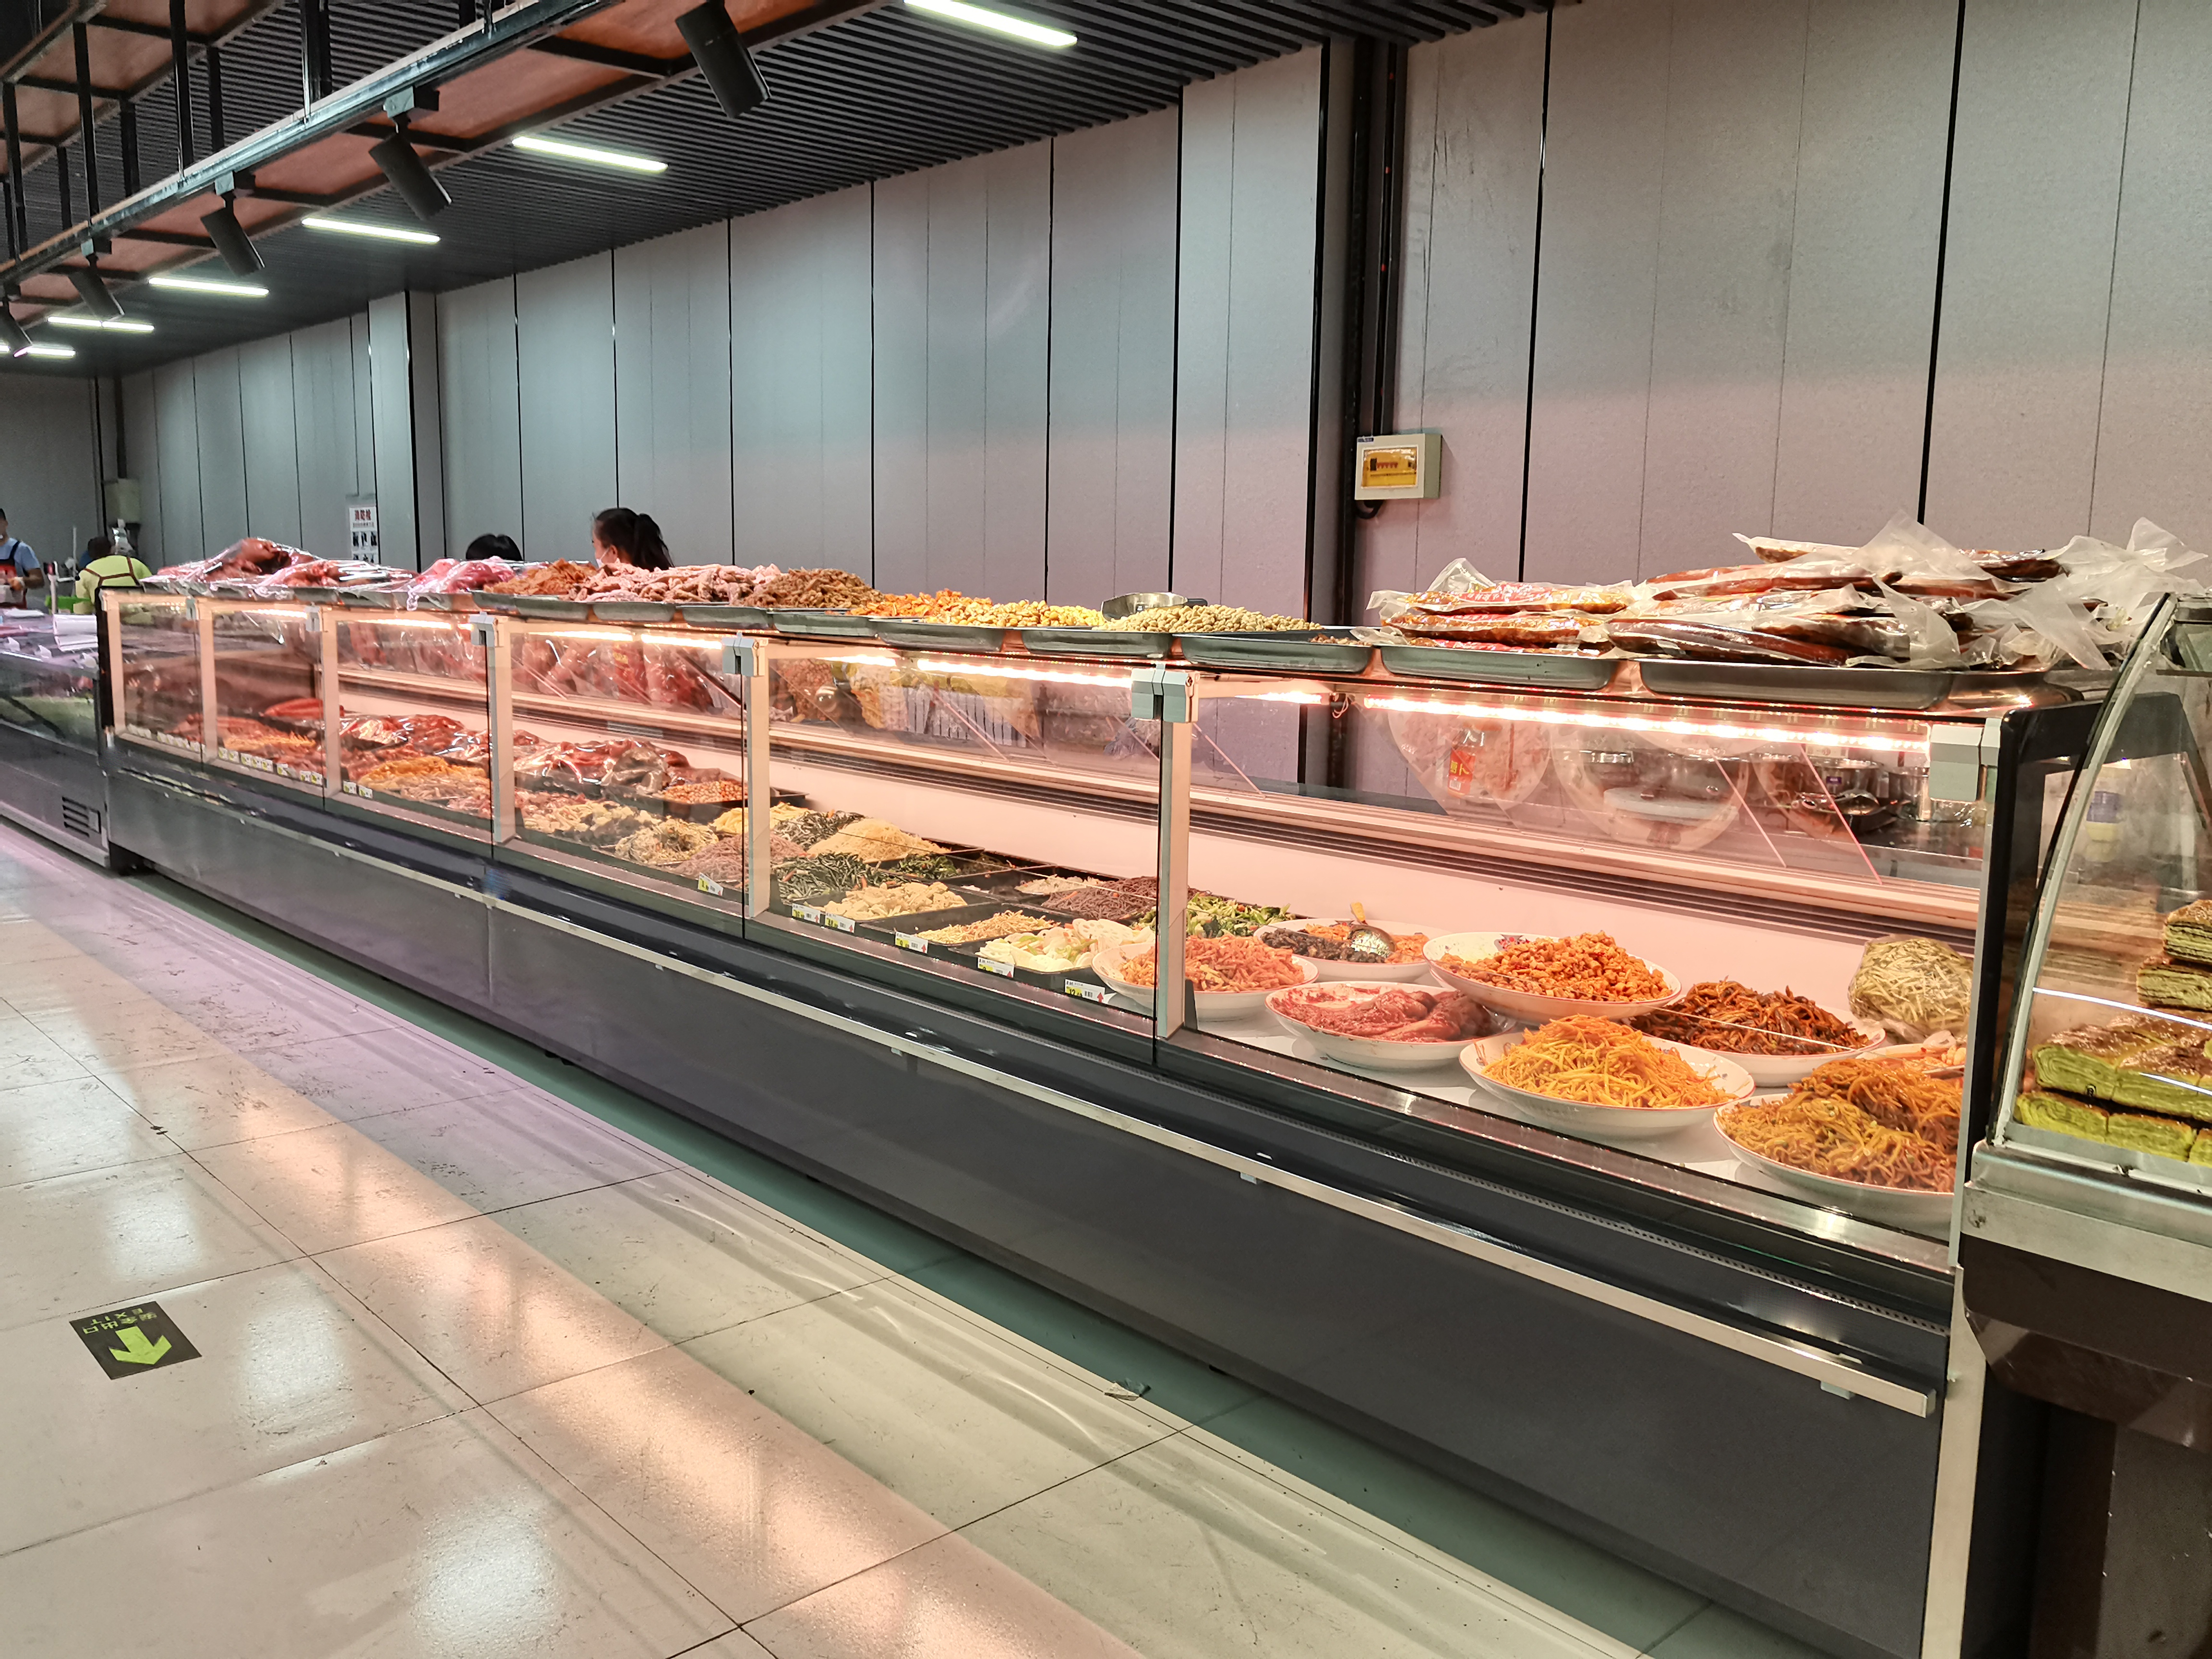 Refrigerated Display Counters Meat Chiller Fresh Food Display Cooler Meat Display Fridge Butchery Freezer Deli Refrigerator  Refrigerated Display Counters Meat Chiller Fresh Food Display Cooler Meat Display Fridge Butchery Freezer Deli Refrigerator  deli case,deli fridge,deli counter,deli display,deli cabinet